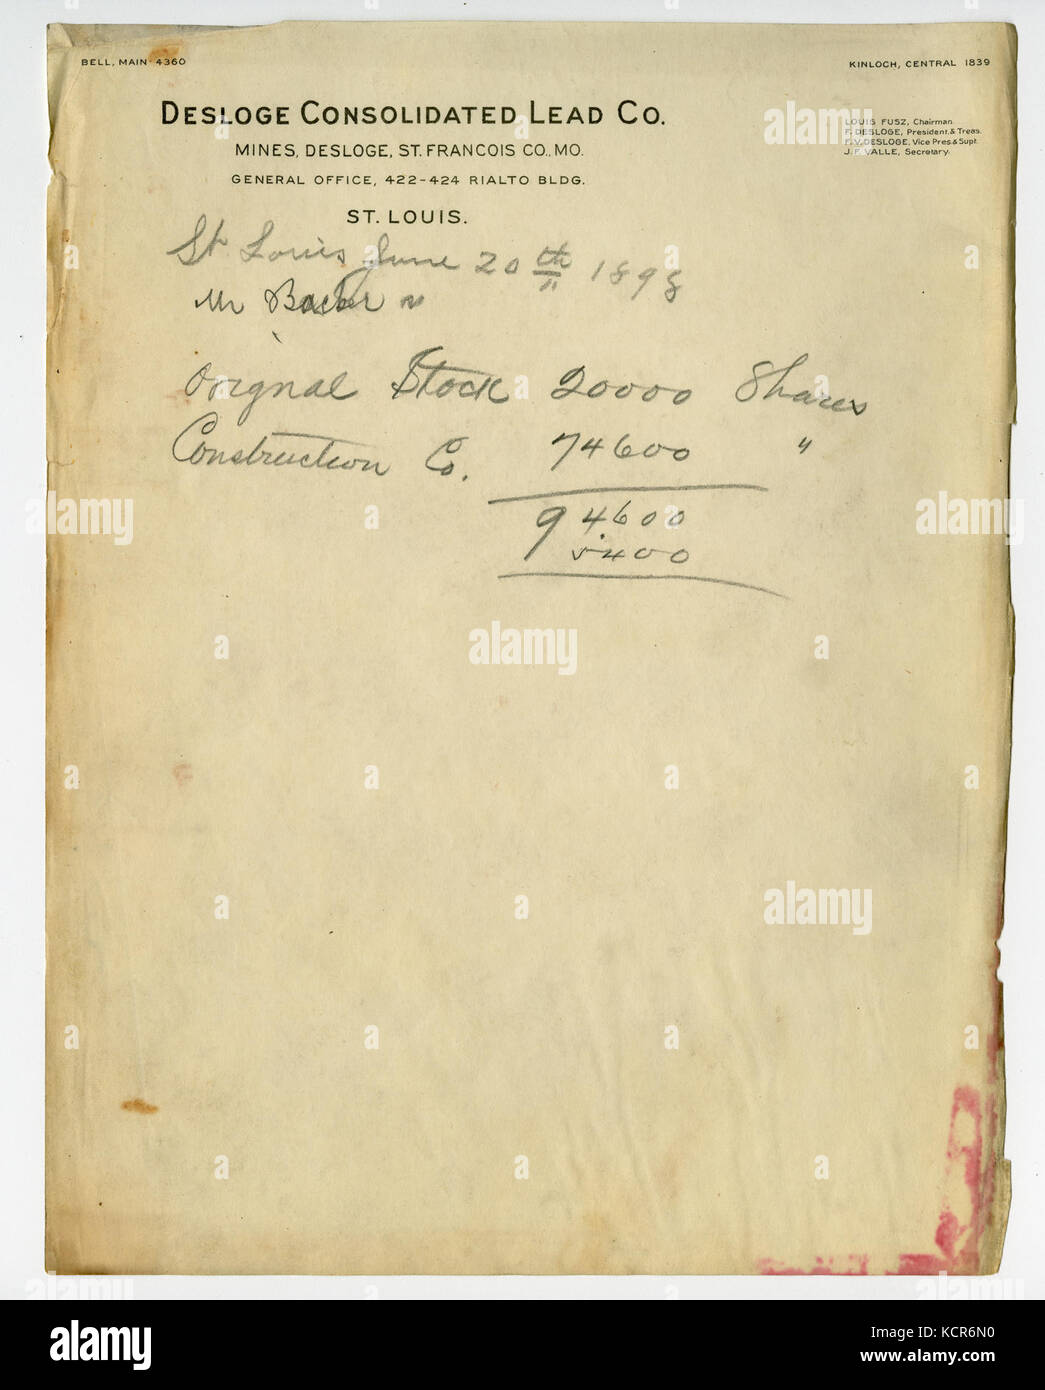 Desloge Consolidated Lead Co. letterhead with handwritten notes regarding stock, June 20, 1898 Stock Photo